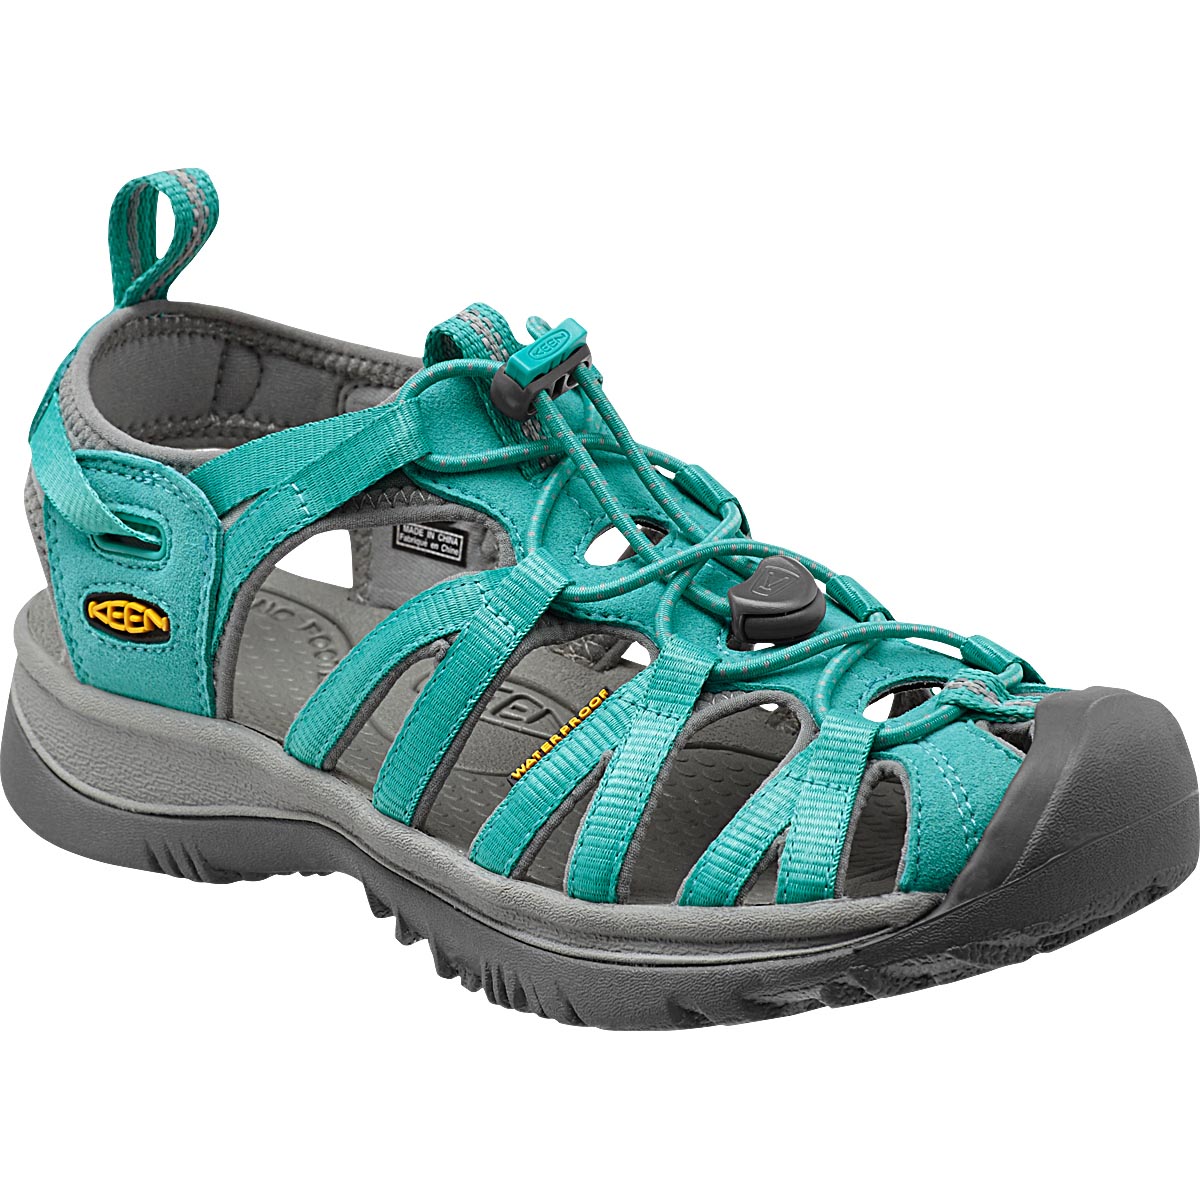 KEEN Women's Whisper Discontinued Pricing